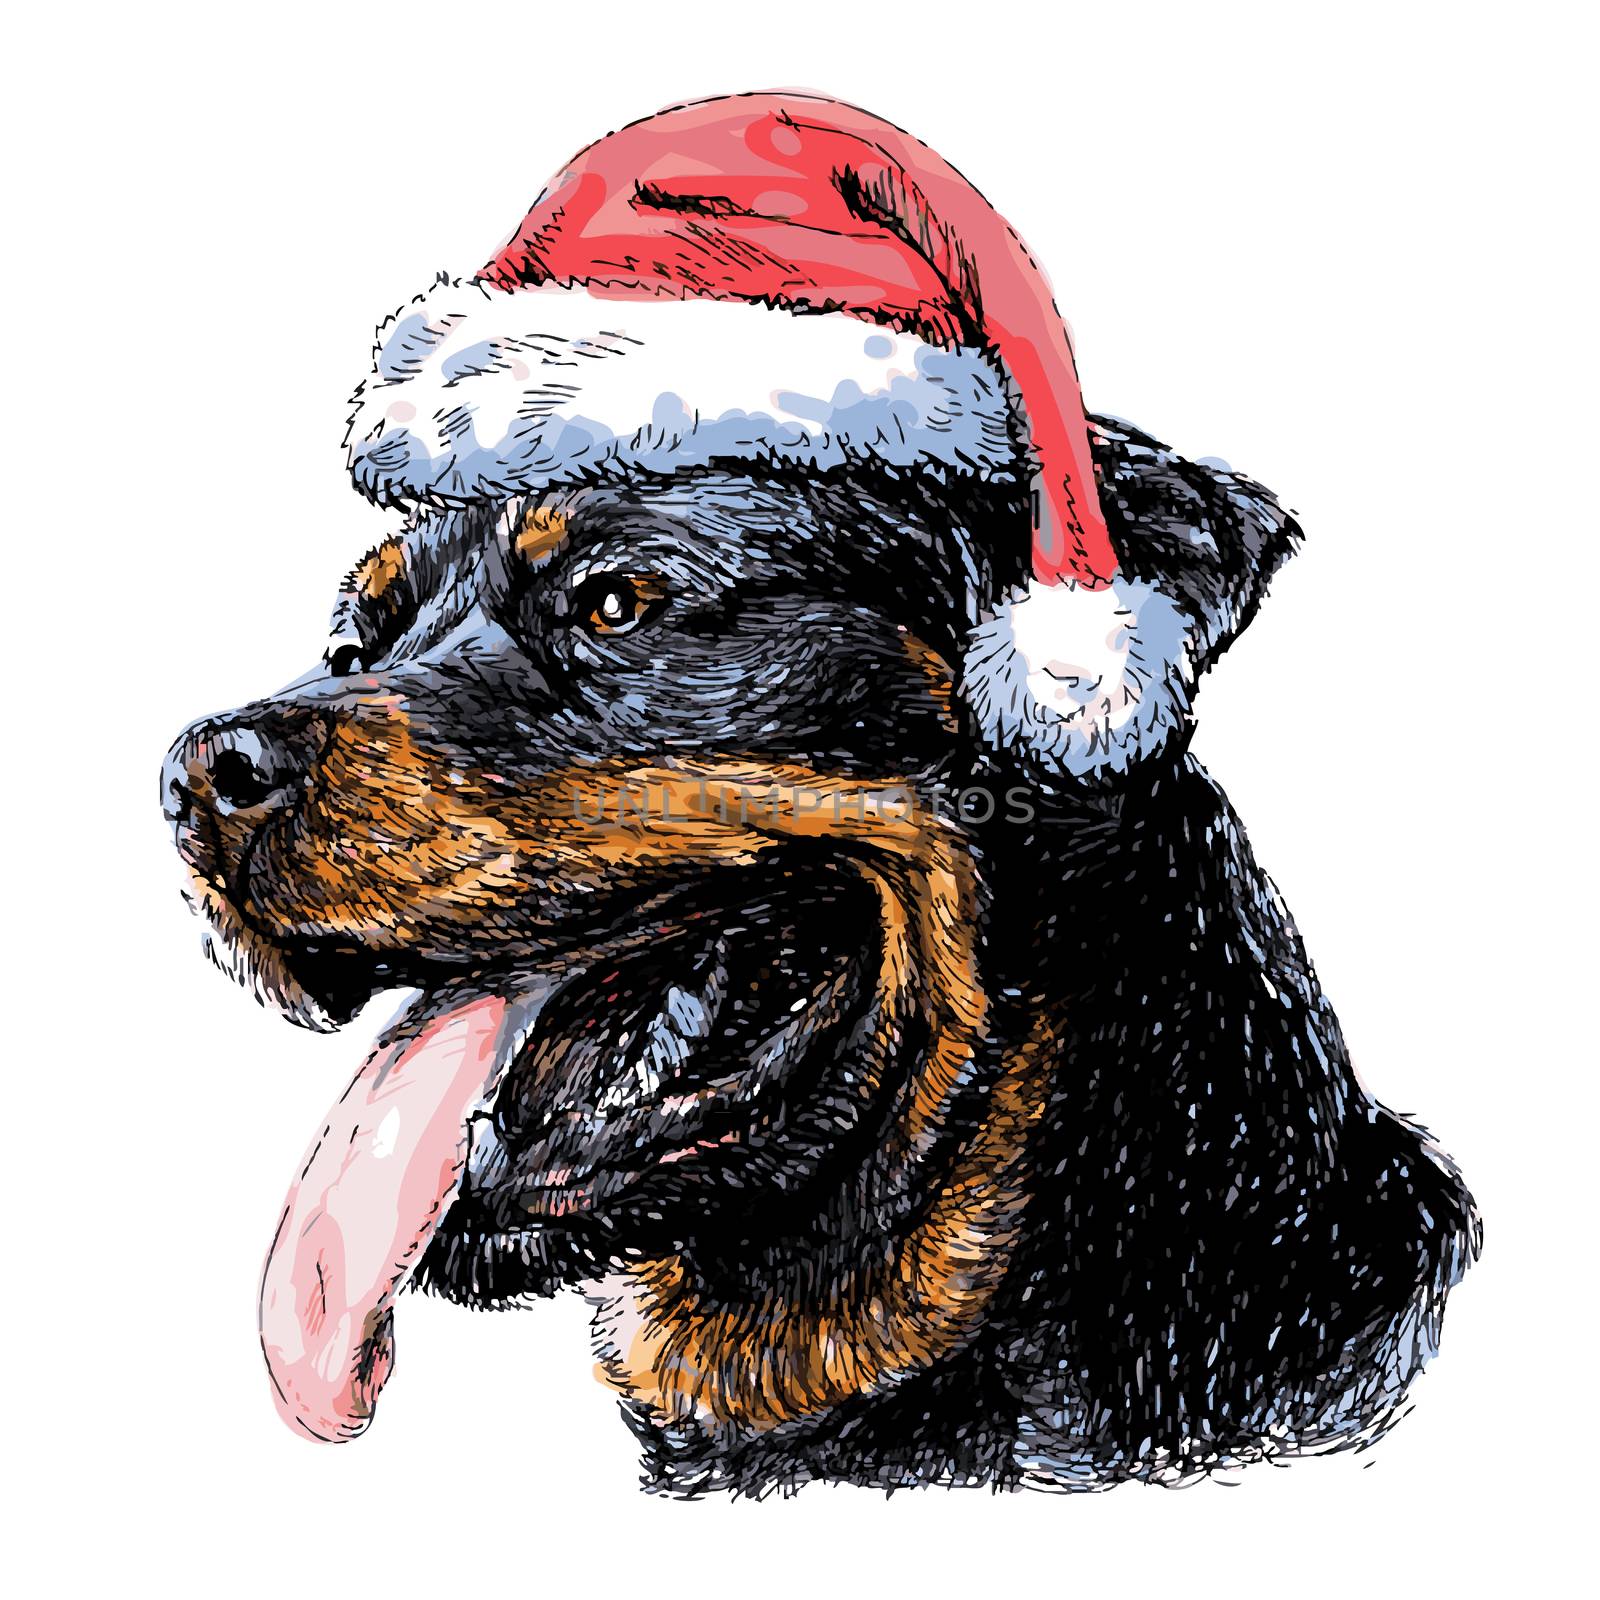 Rottweiler with santa claus hat hand drawn vector , use for christmas background